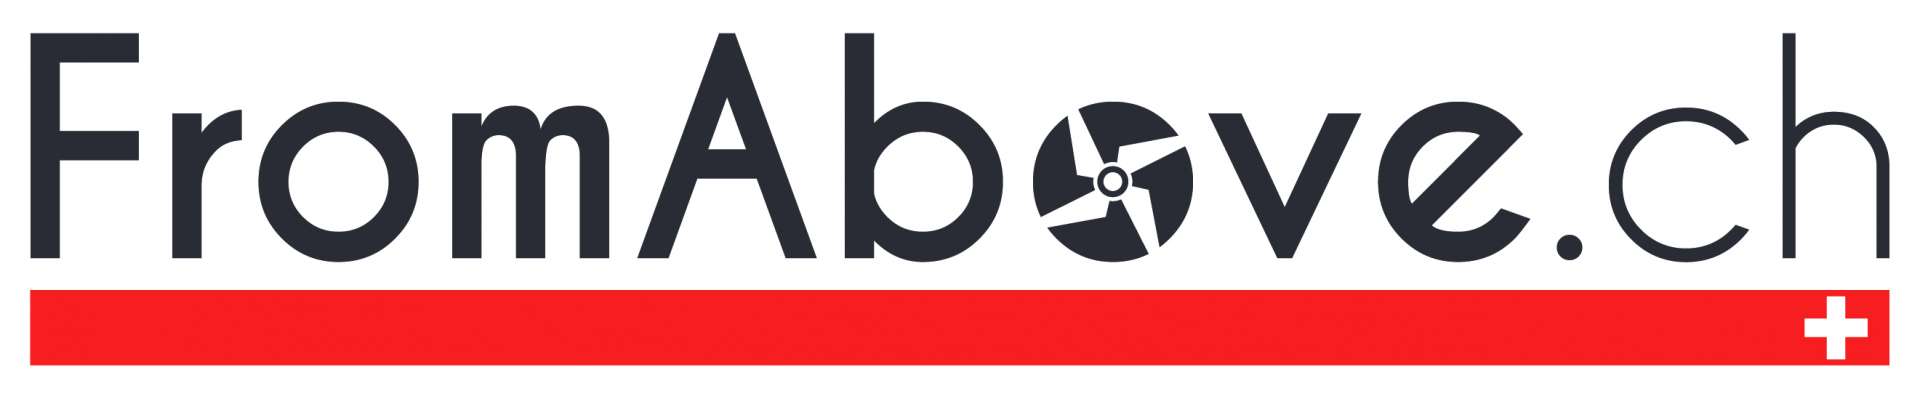 FromAbove.ch logo